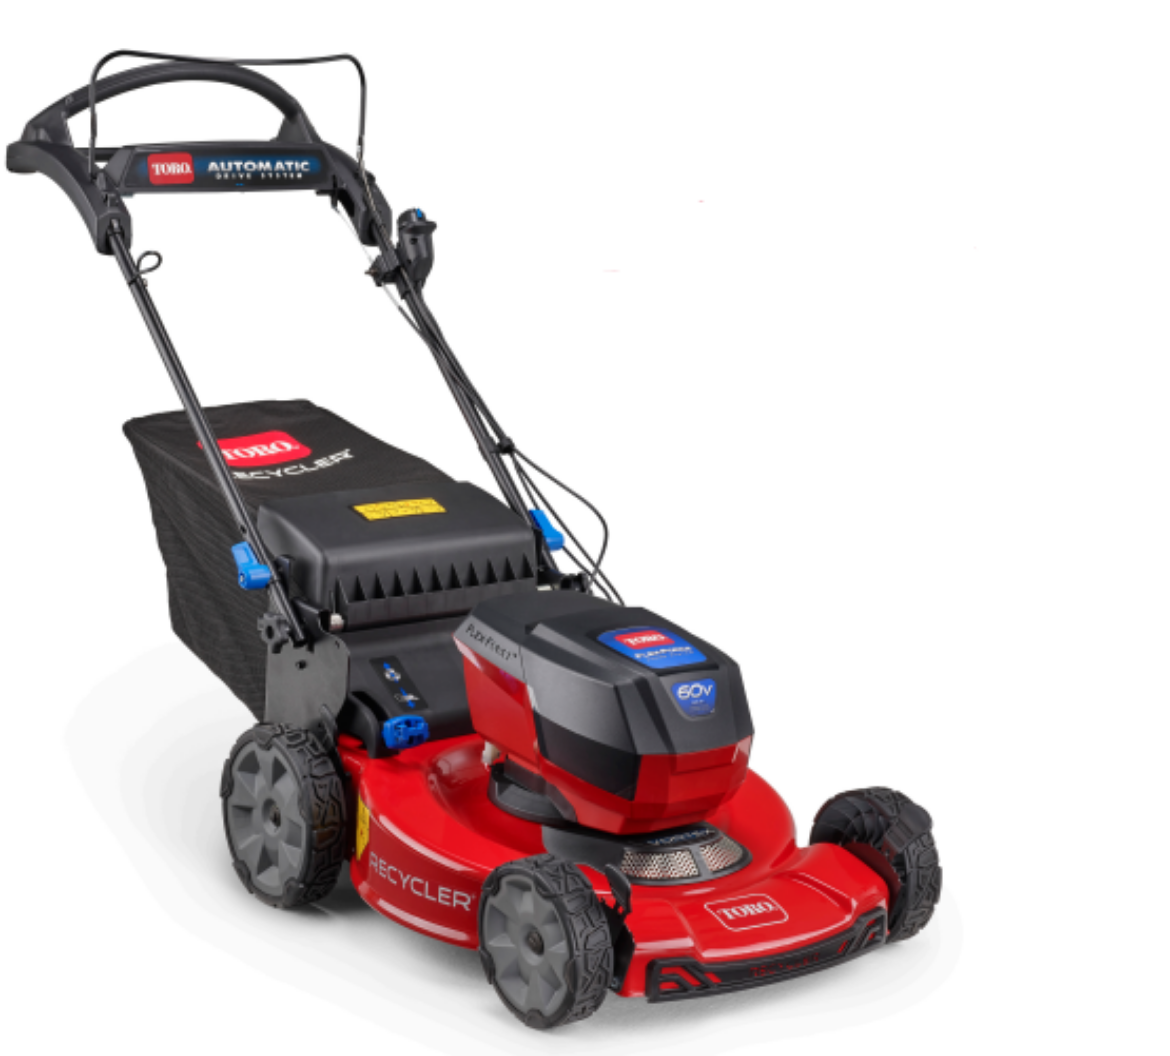 Picture of Toro 60V Vortex Recycler 56cm Kit (6.0Ah) Mower, Battery & Charger included